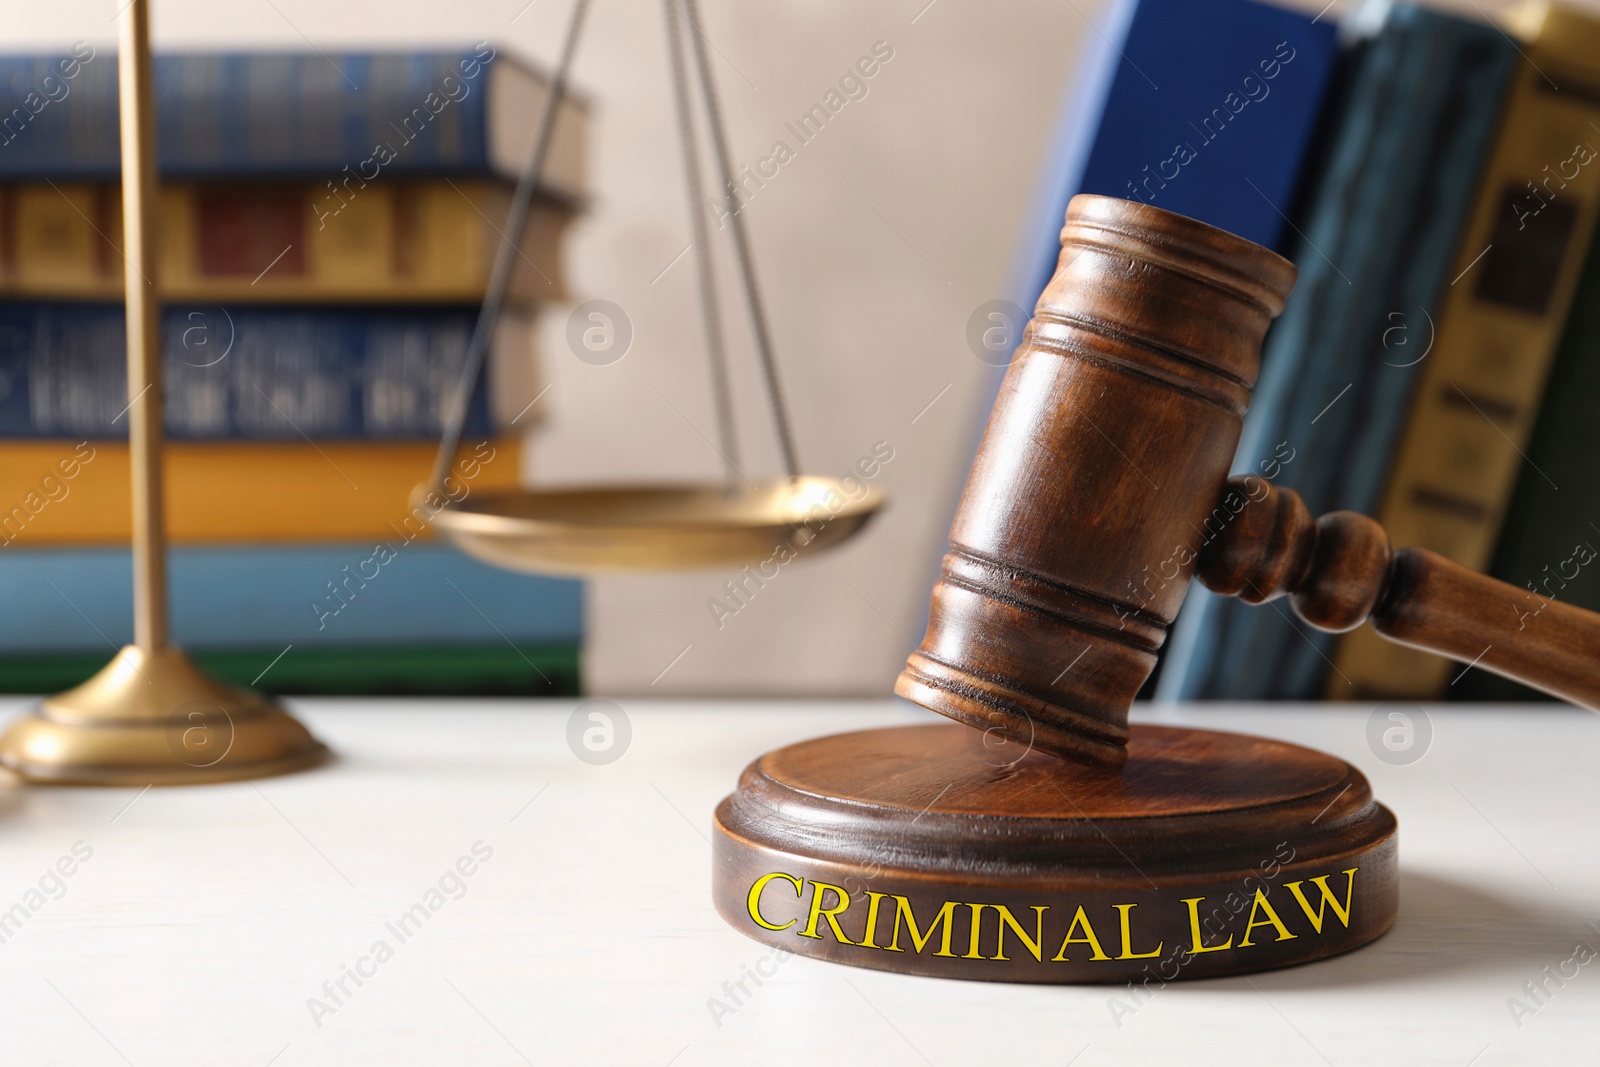 Image of Wooden gavel, scales of justice and books on table. Criminal law concept